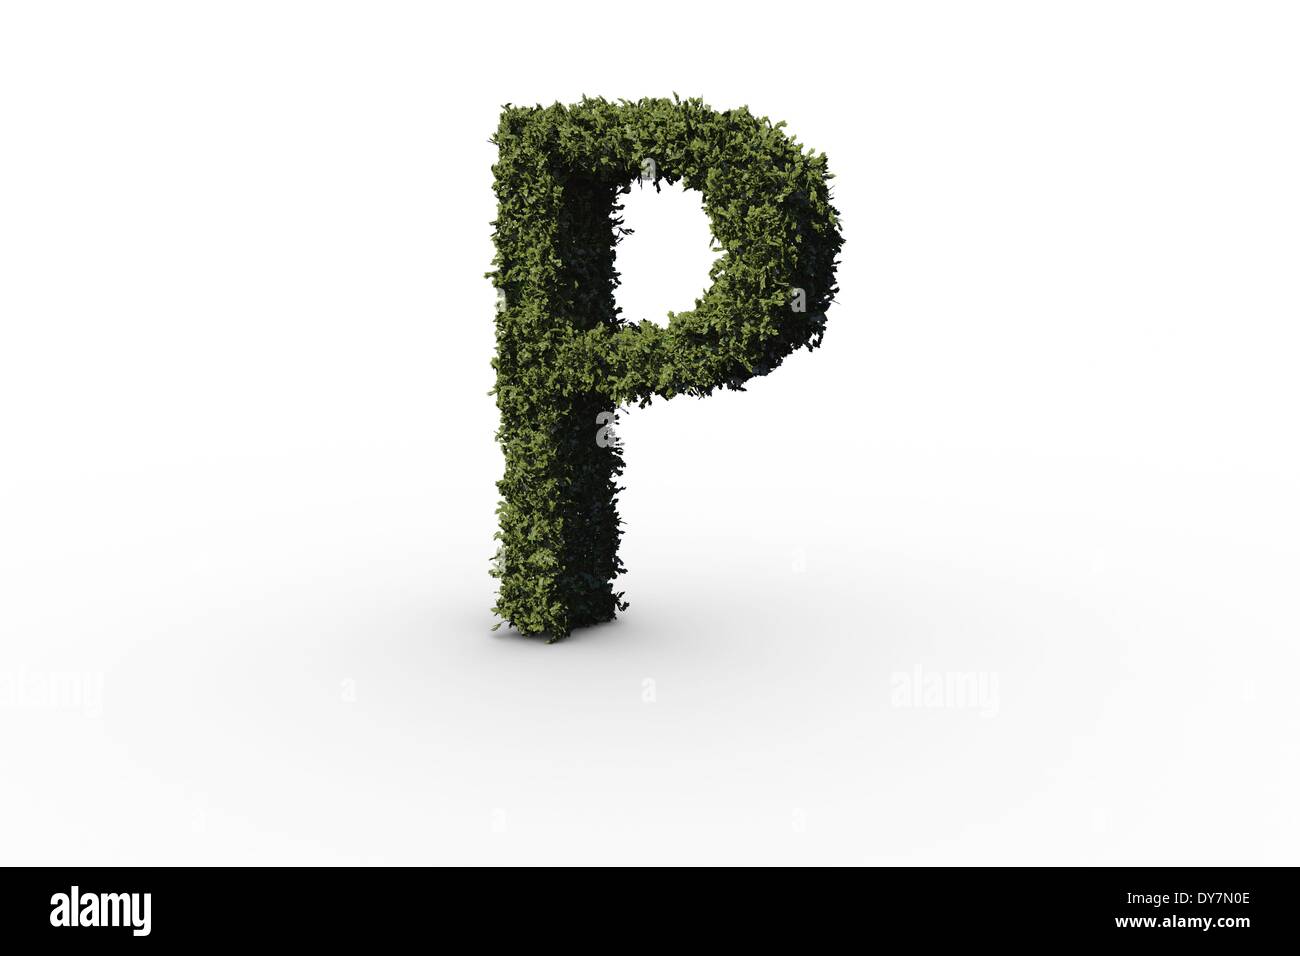 Capital letter p made of leaves Stock Photo